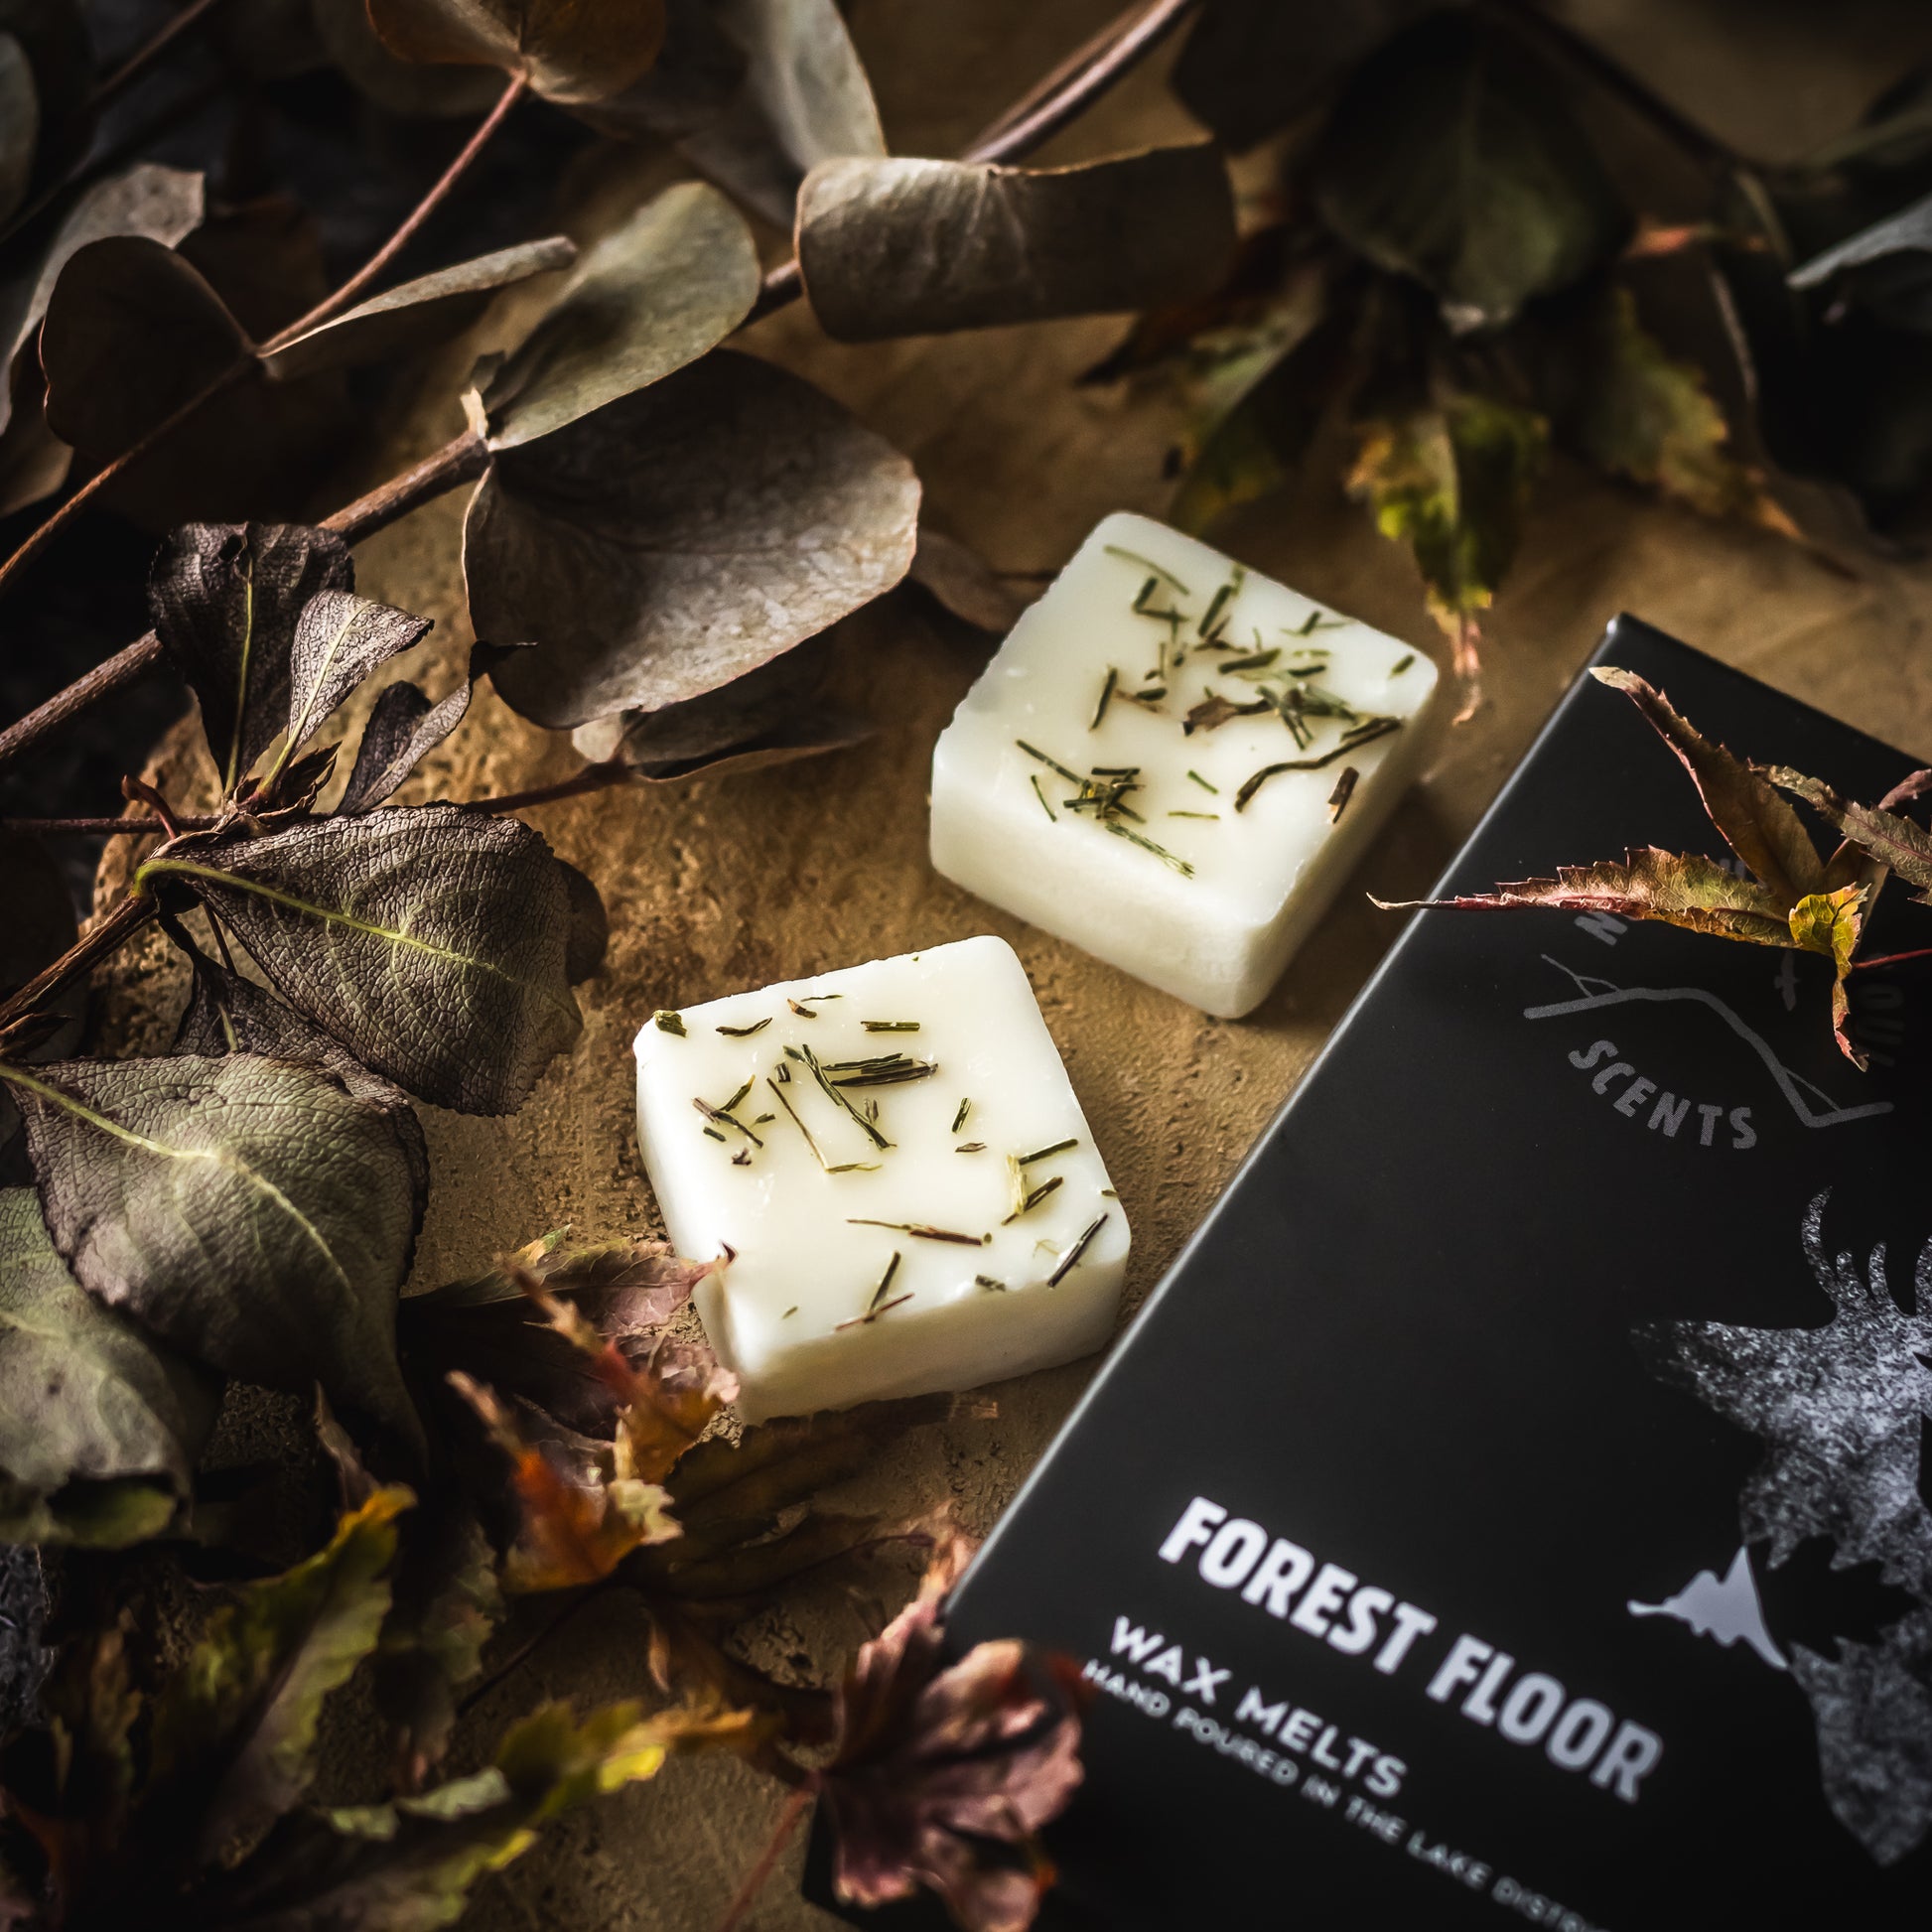 Forest Floor Wax Melts – Northern Soul Scents